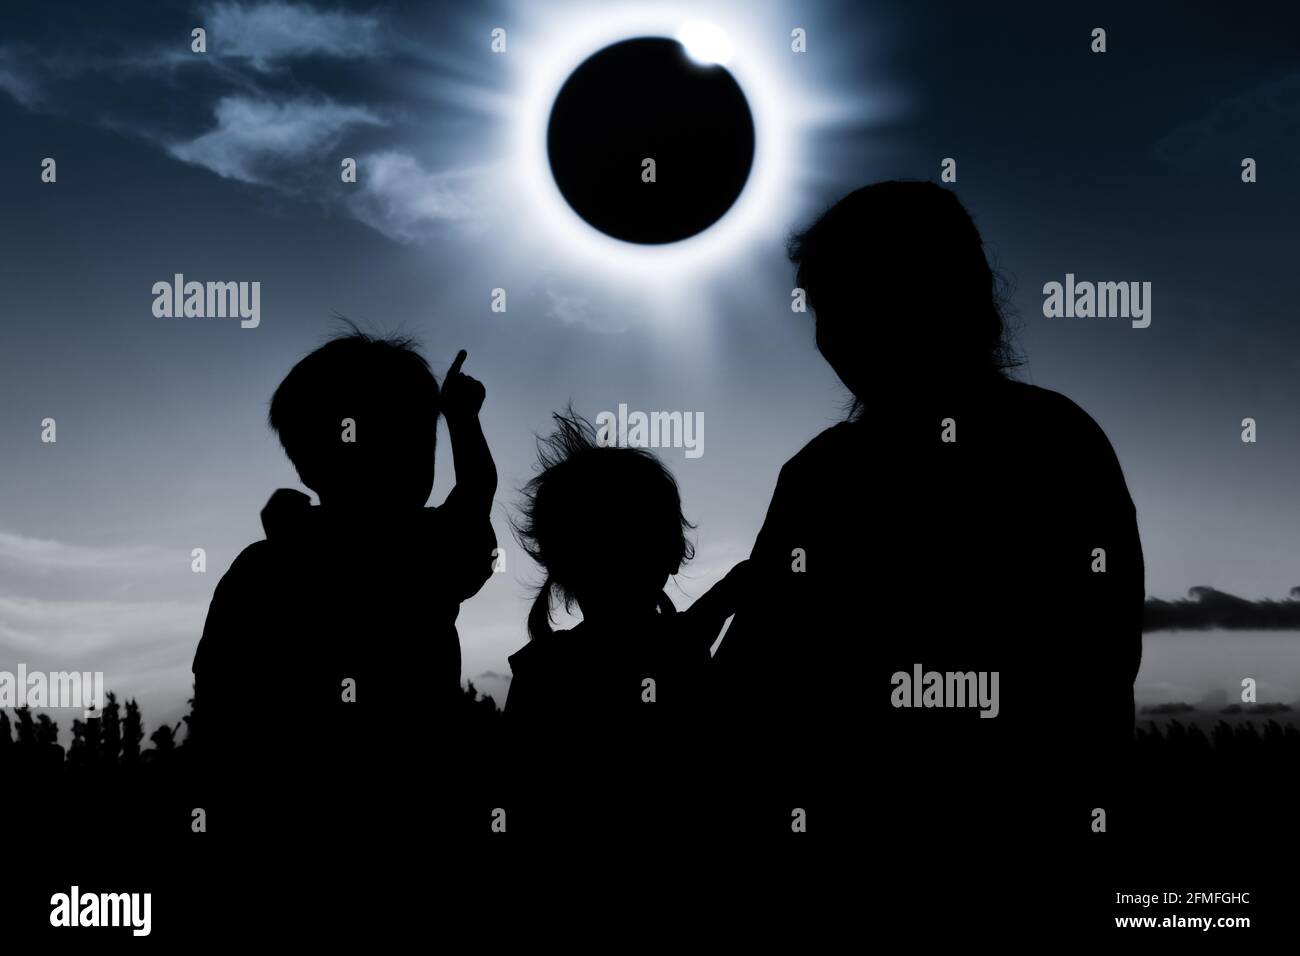 Natural phenomenon. Silhouette back view of mother and child sitting and relaxing together. Boy pointing to solar eclipse on dark sky background. Happ Stock Photo